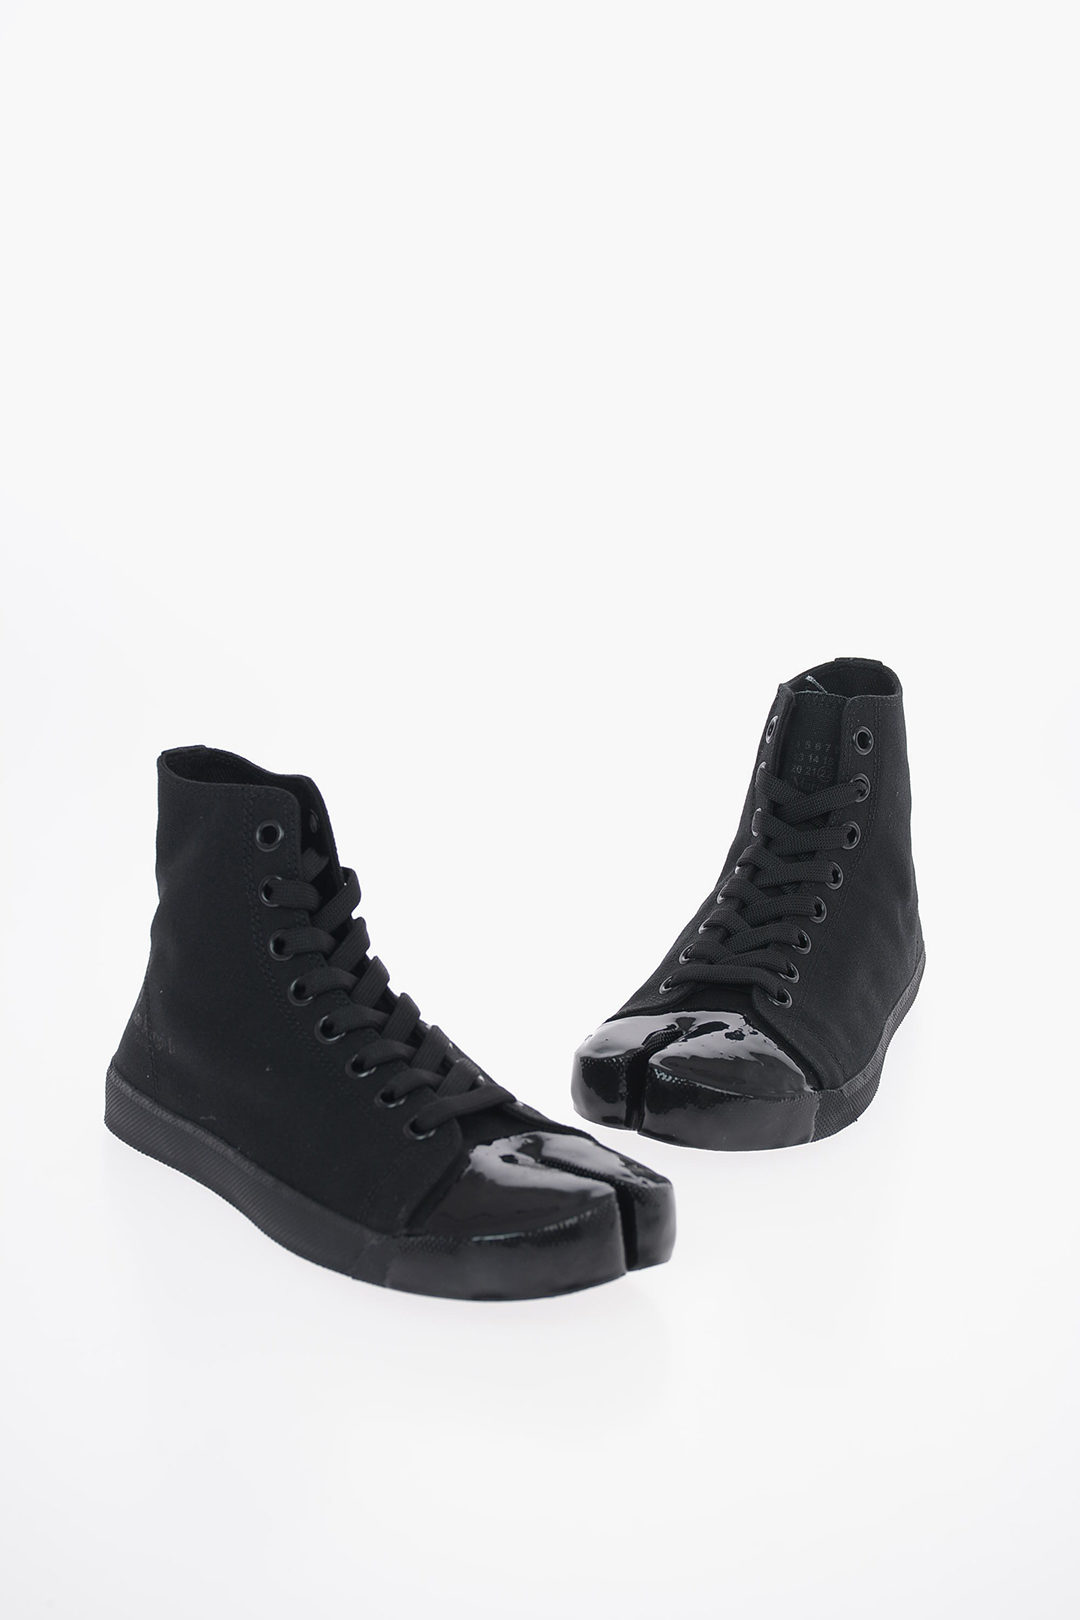 MM22 Canvas TABI High-Top Sneakers with Leather Details